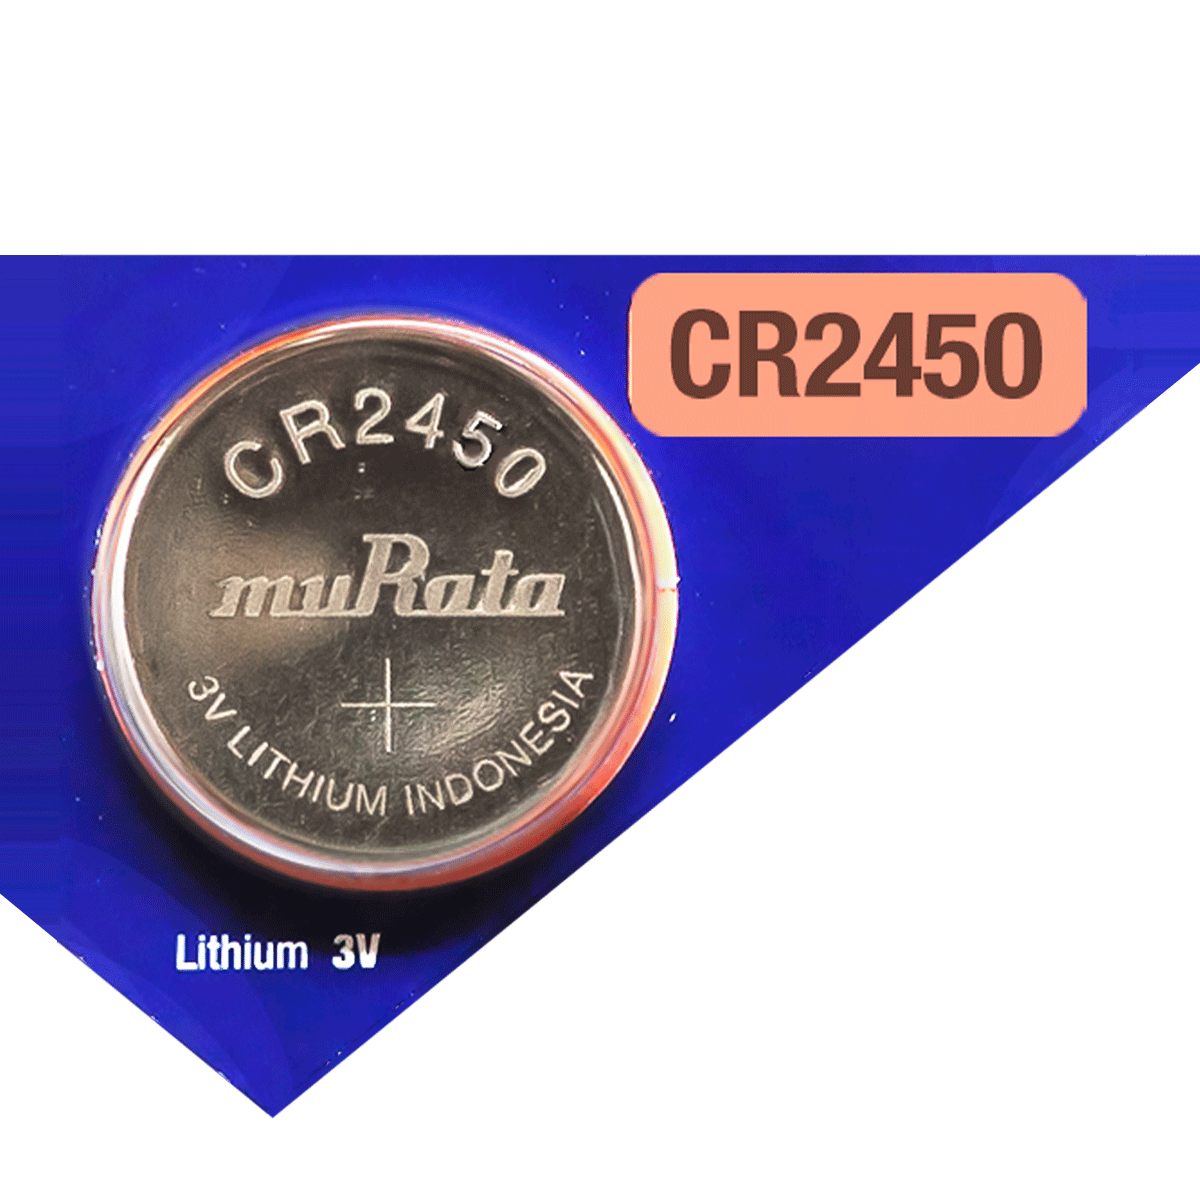 Tianqiu CR2450 Battery 3V Lithium Coin (2, 5, 10, 20, 50, 100 Count  Wholesale)